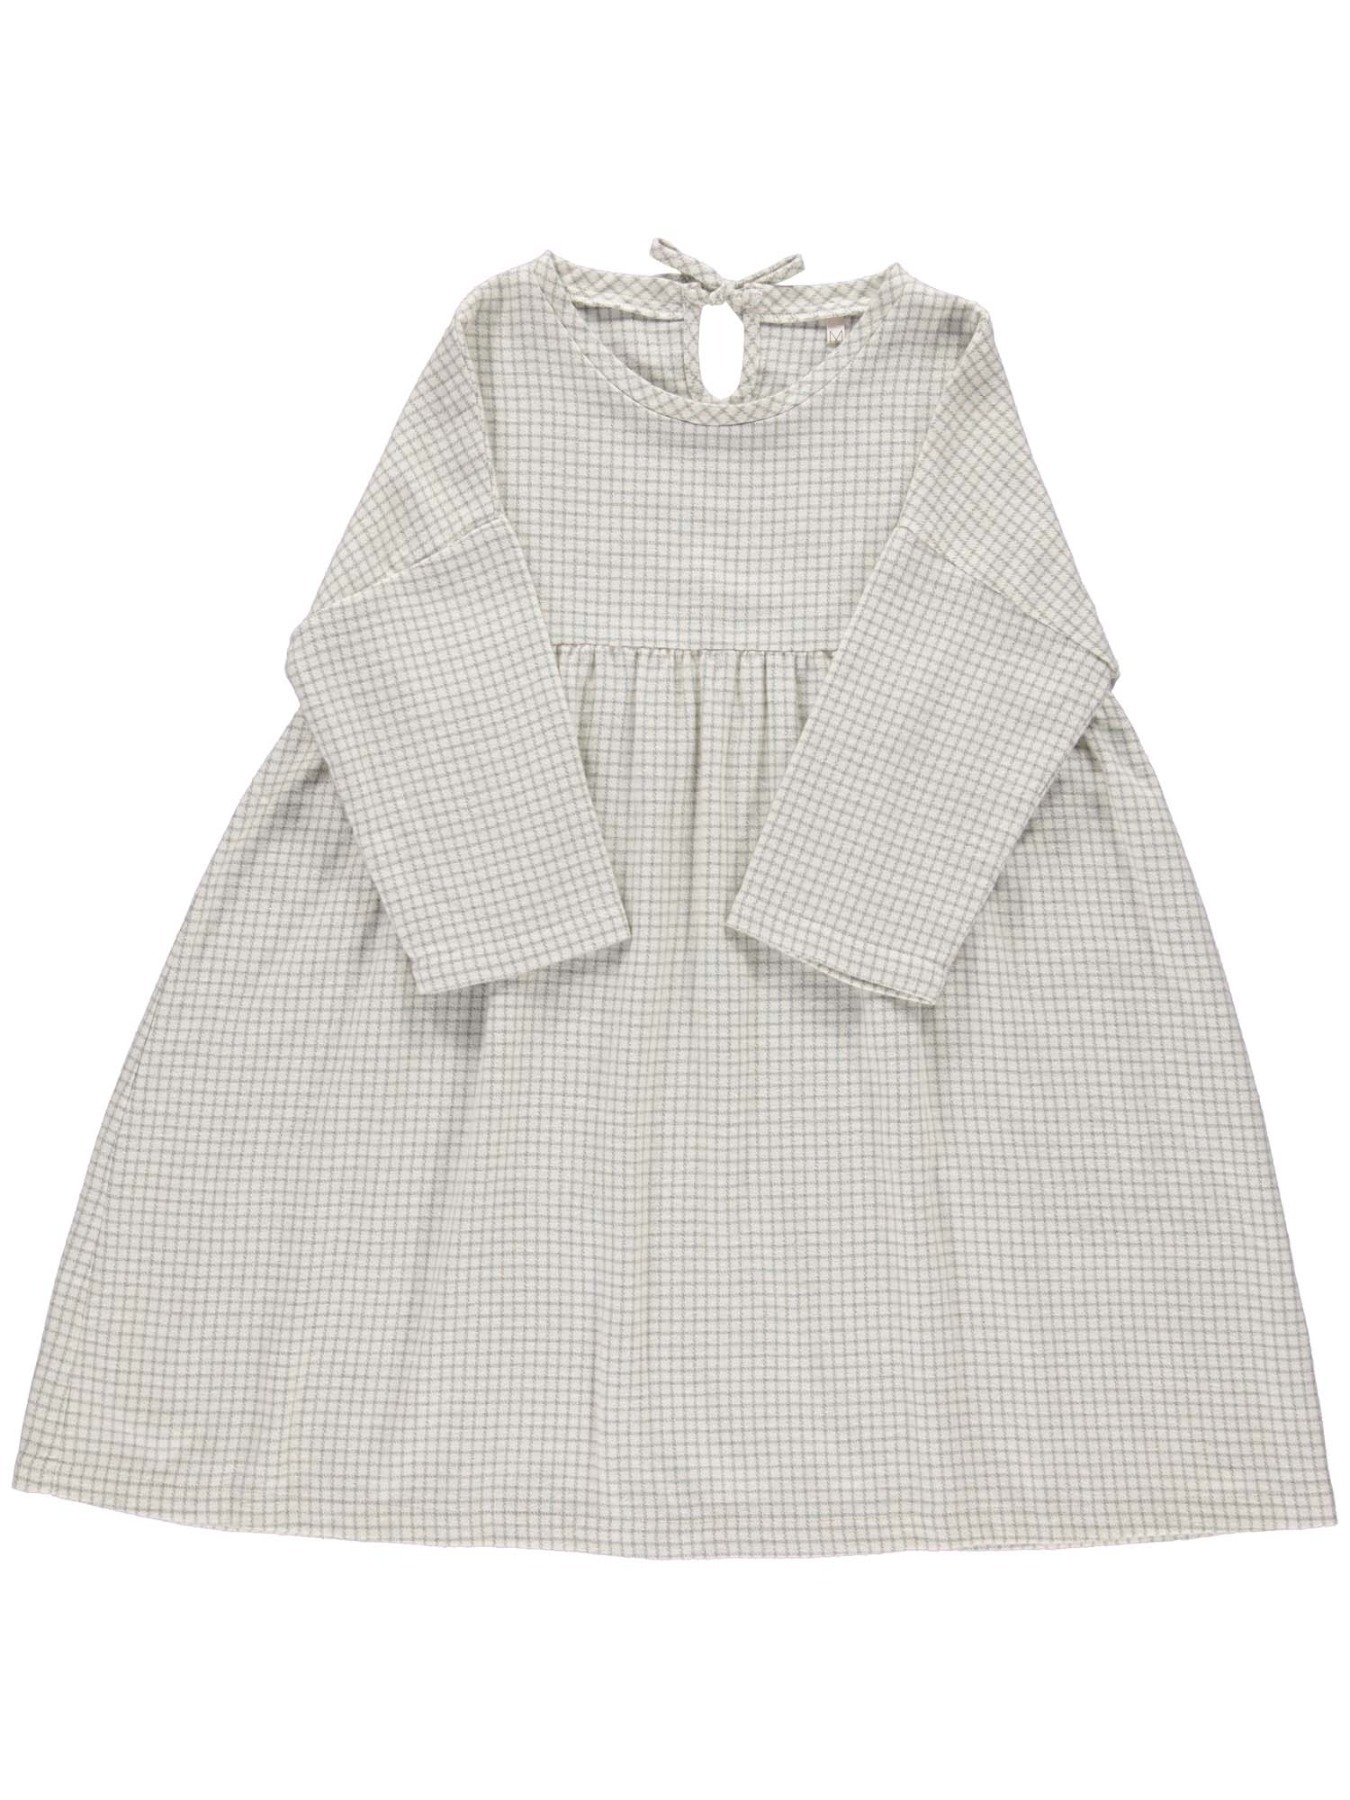 Monkind - Silver Checked Oversized Dress - KIDS 6